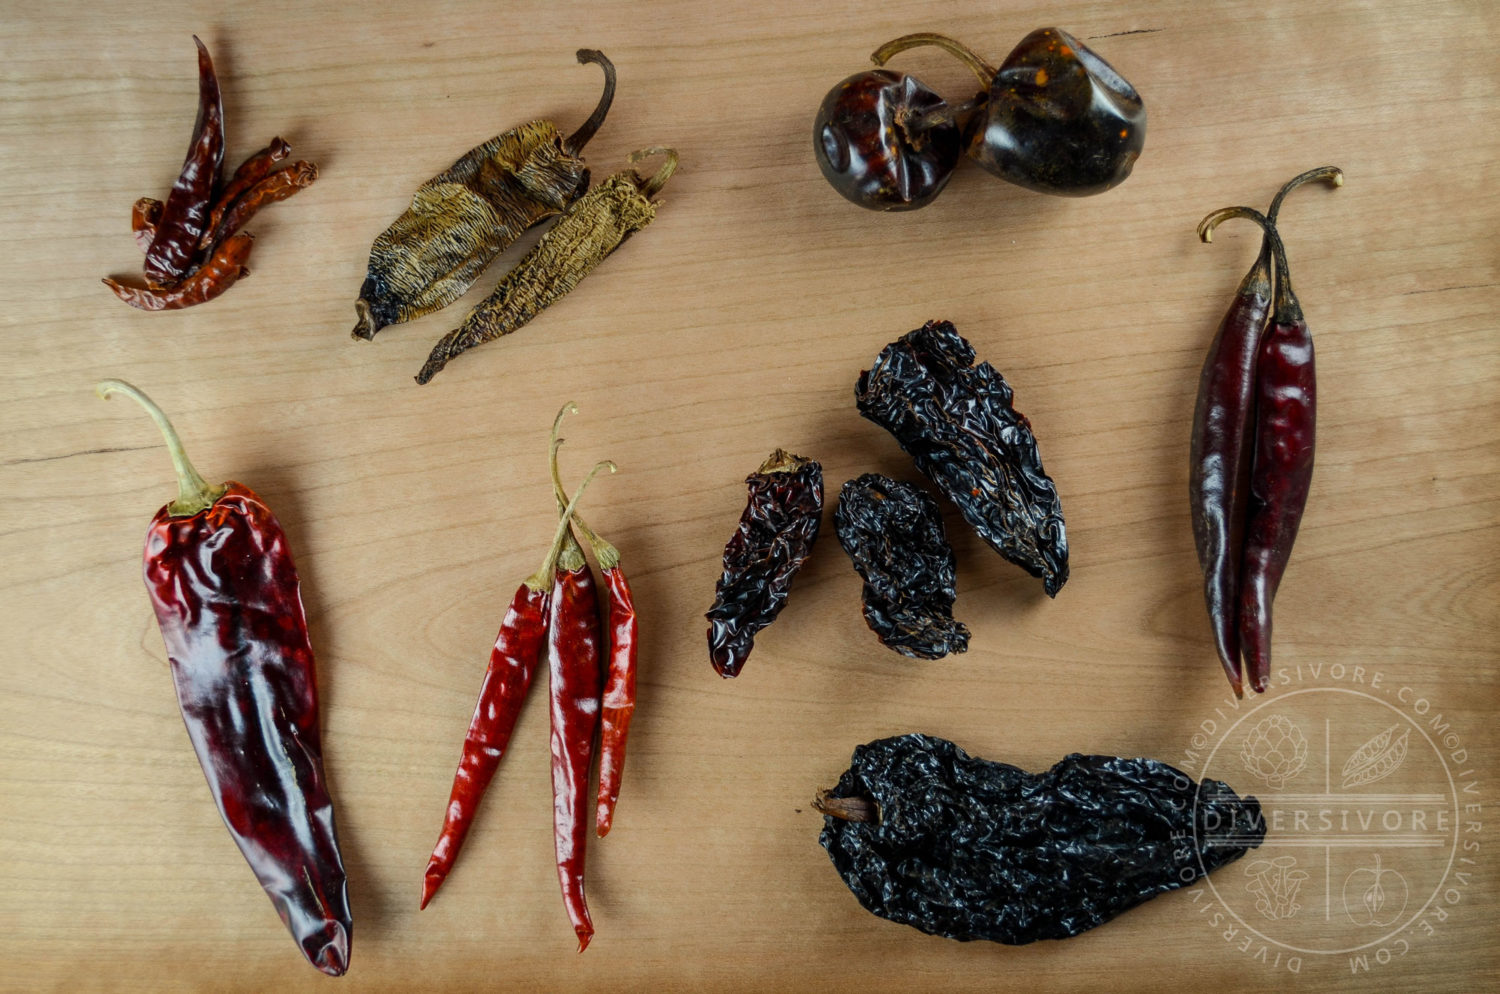 Various Dried Mexican Chilies - Diversivore.com